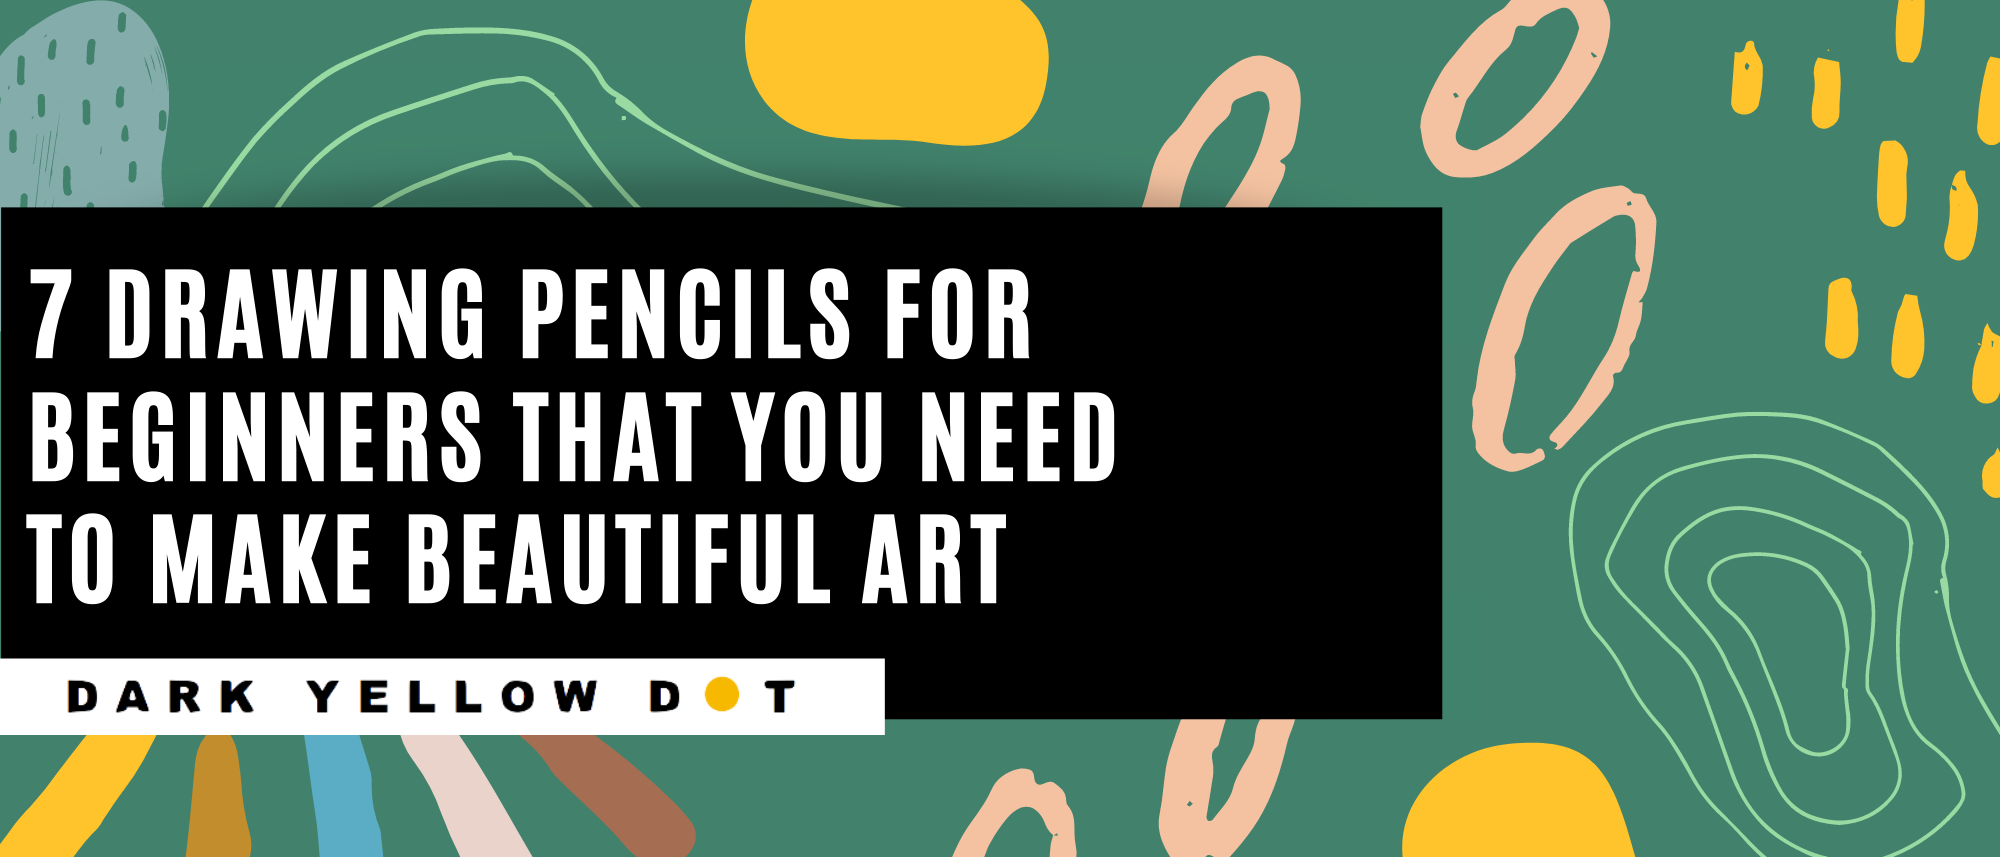 7 Drawing Pencils For Beginners That You Need To Make Beautiful Art